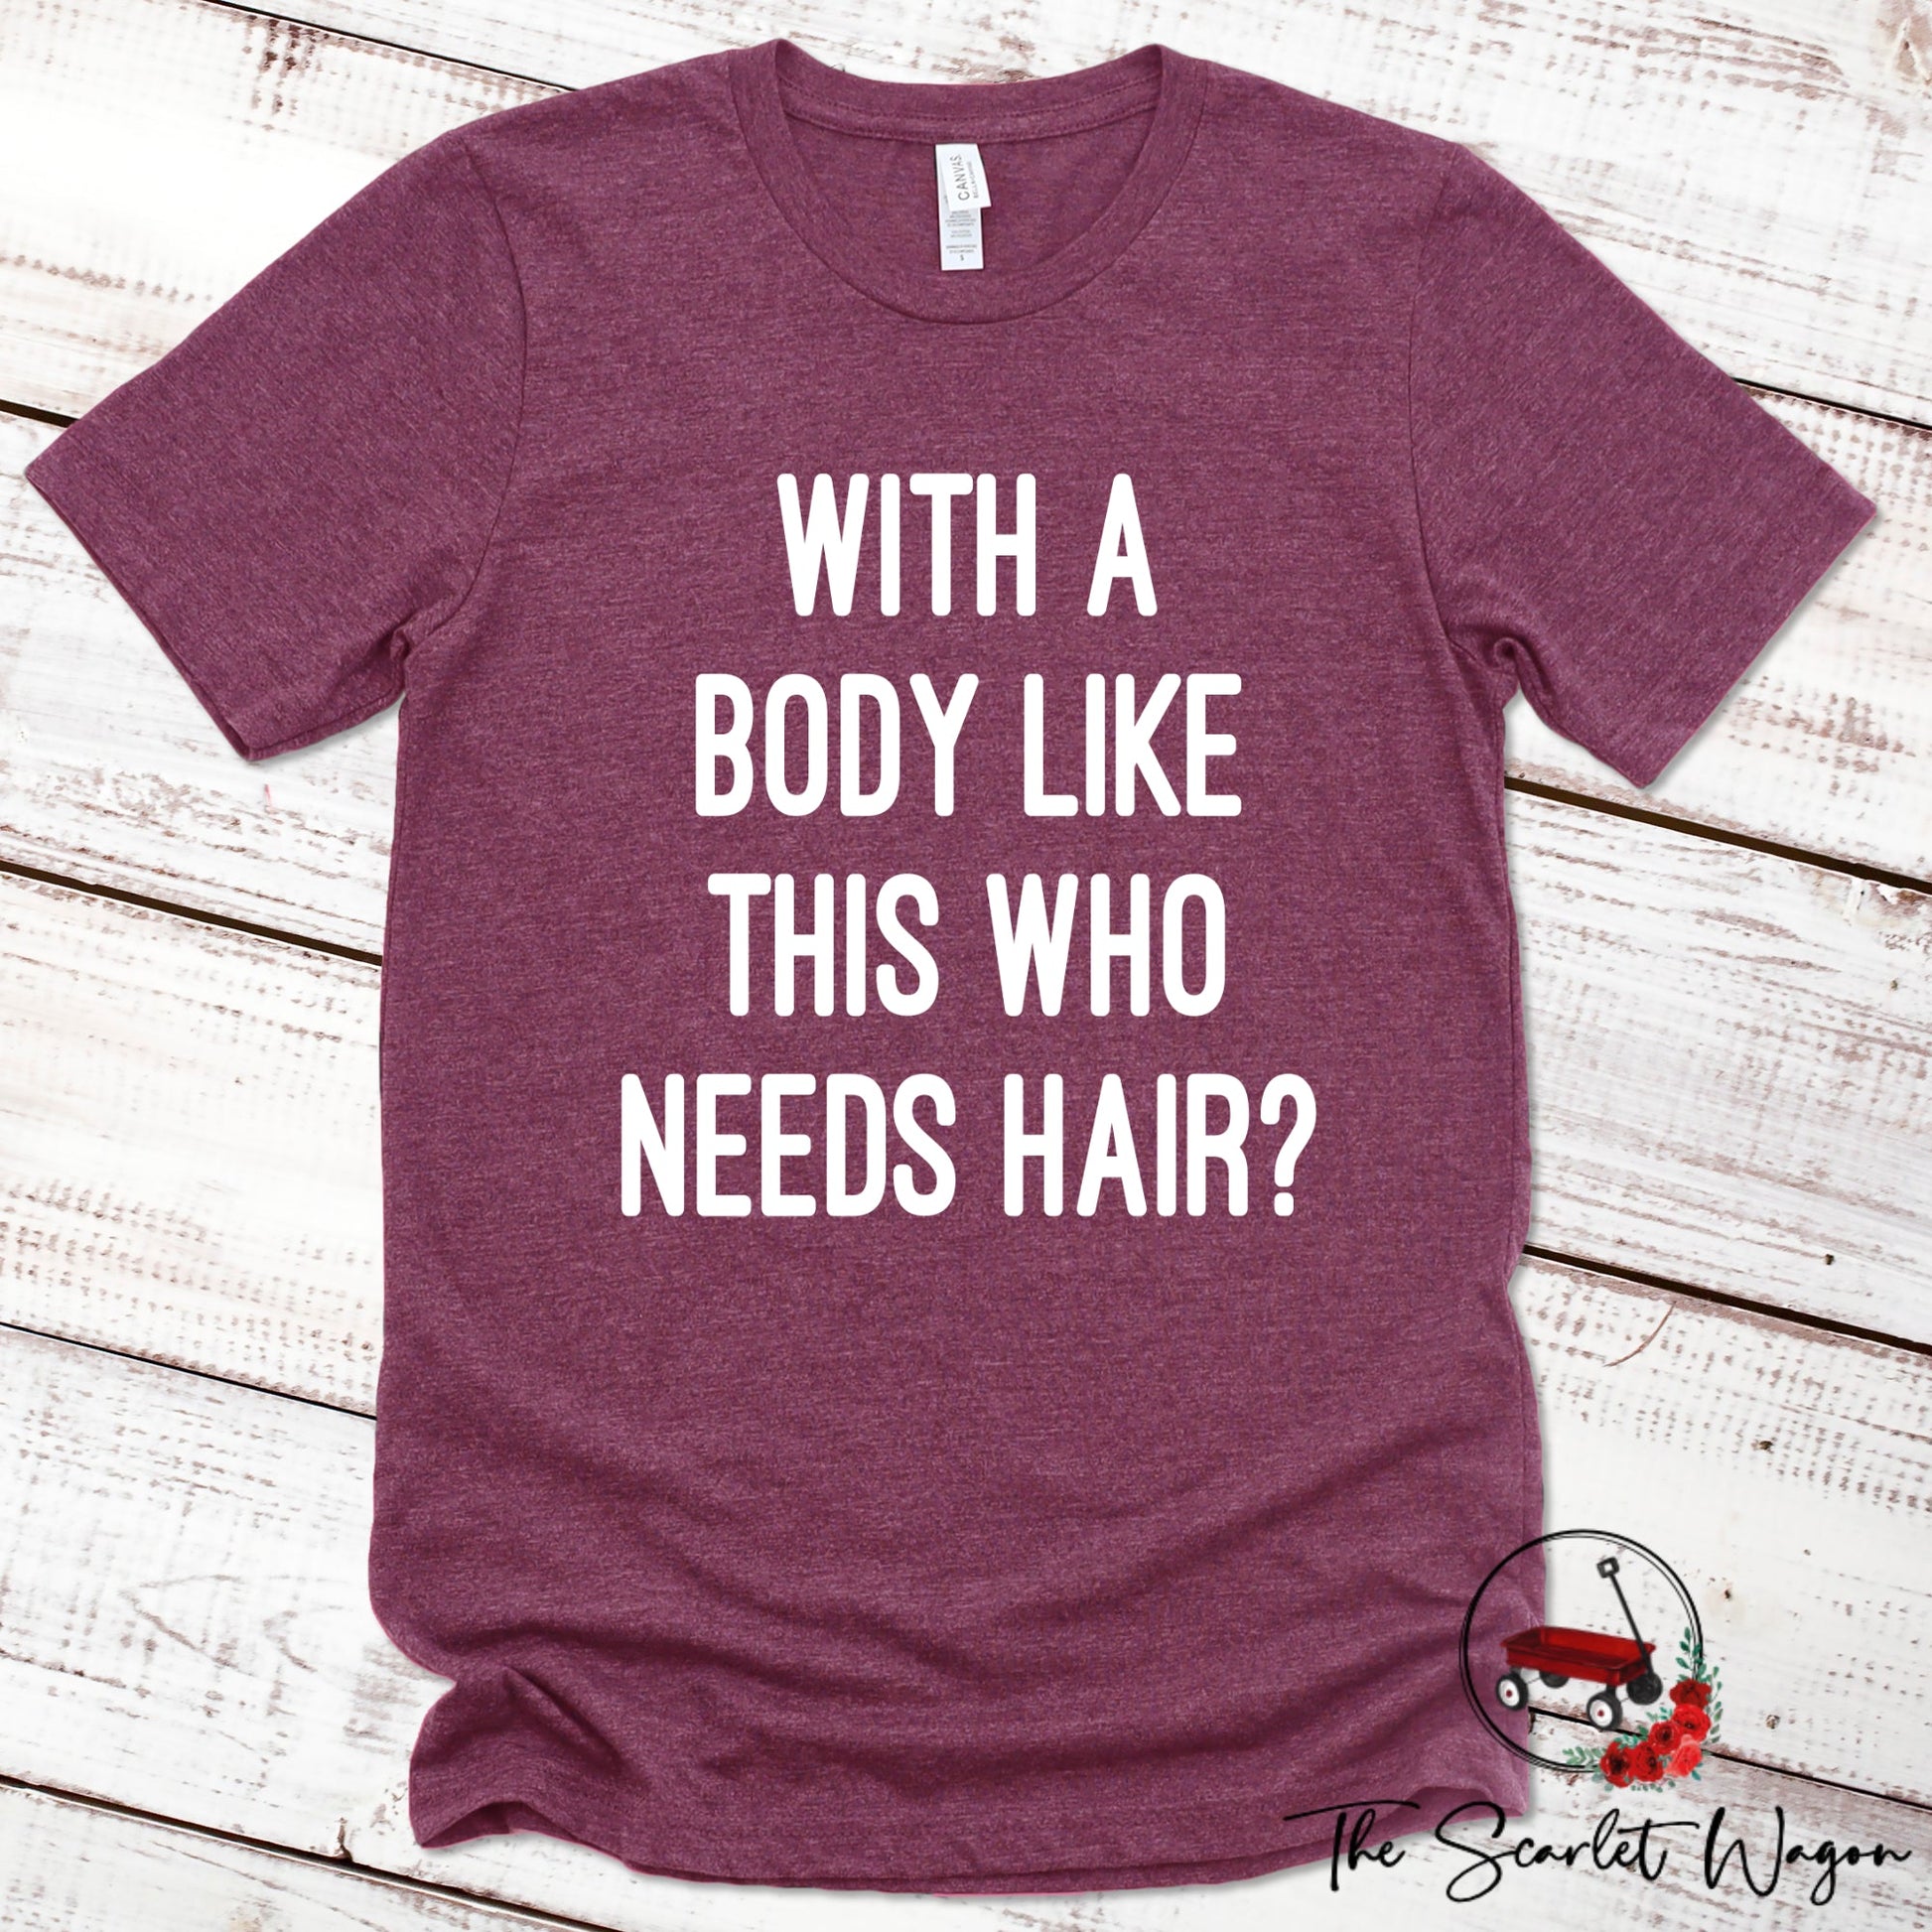 With a Body Like This Who Needs Hair Premium Tee Scarlet Wagon Heather Maroon XS 